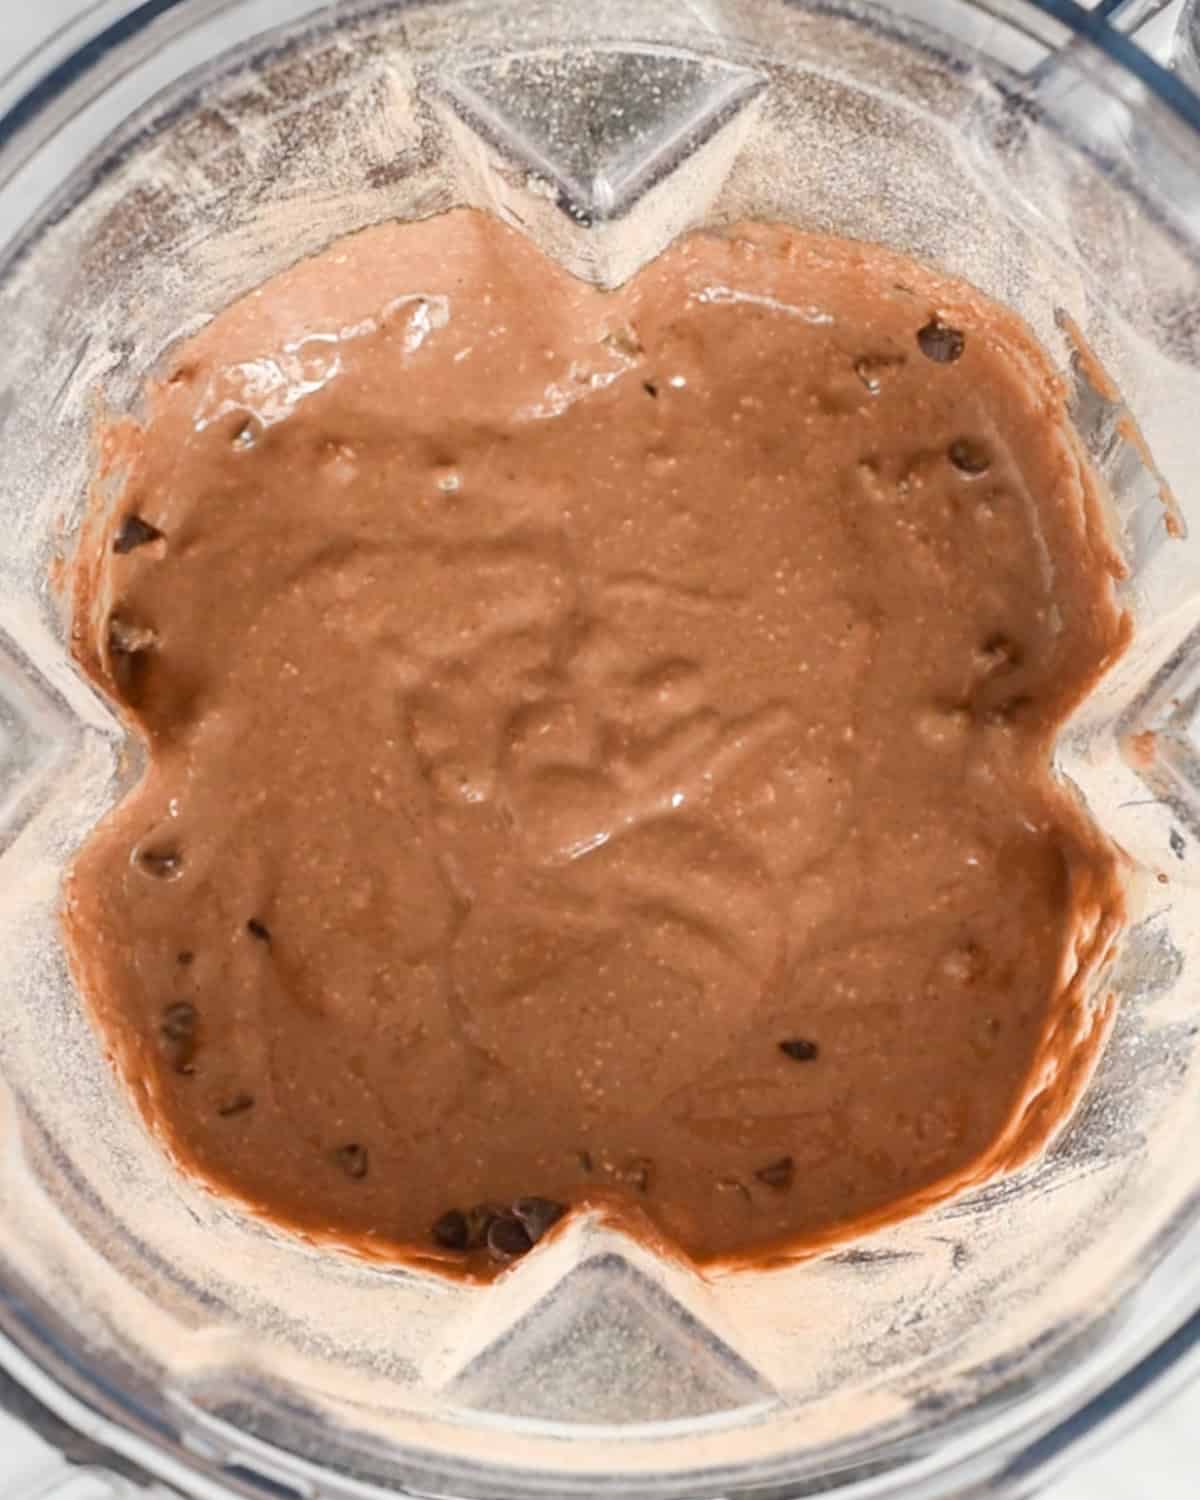 final Healthy Chocolate Pancakes batter in a blending container